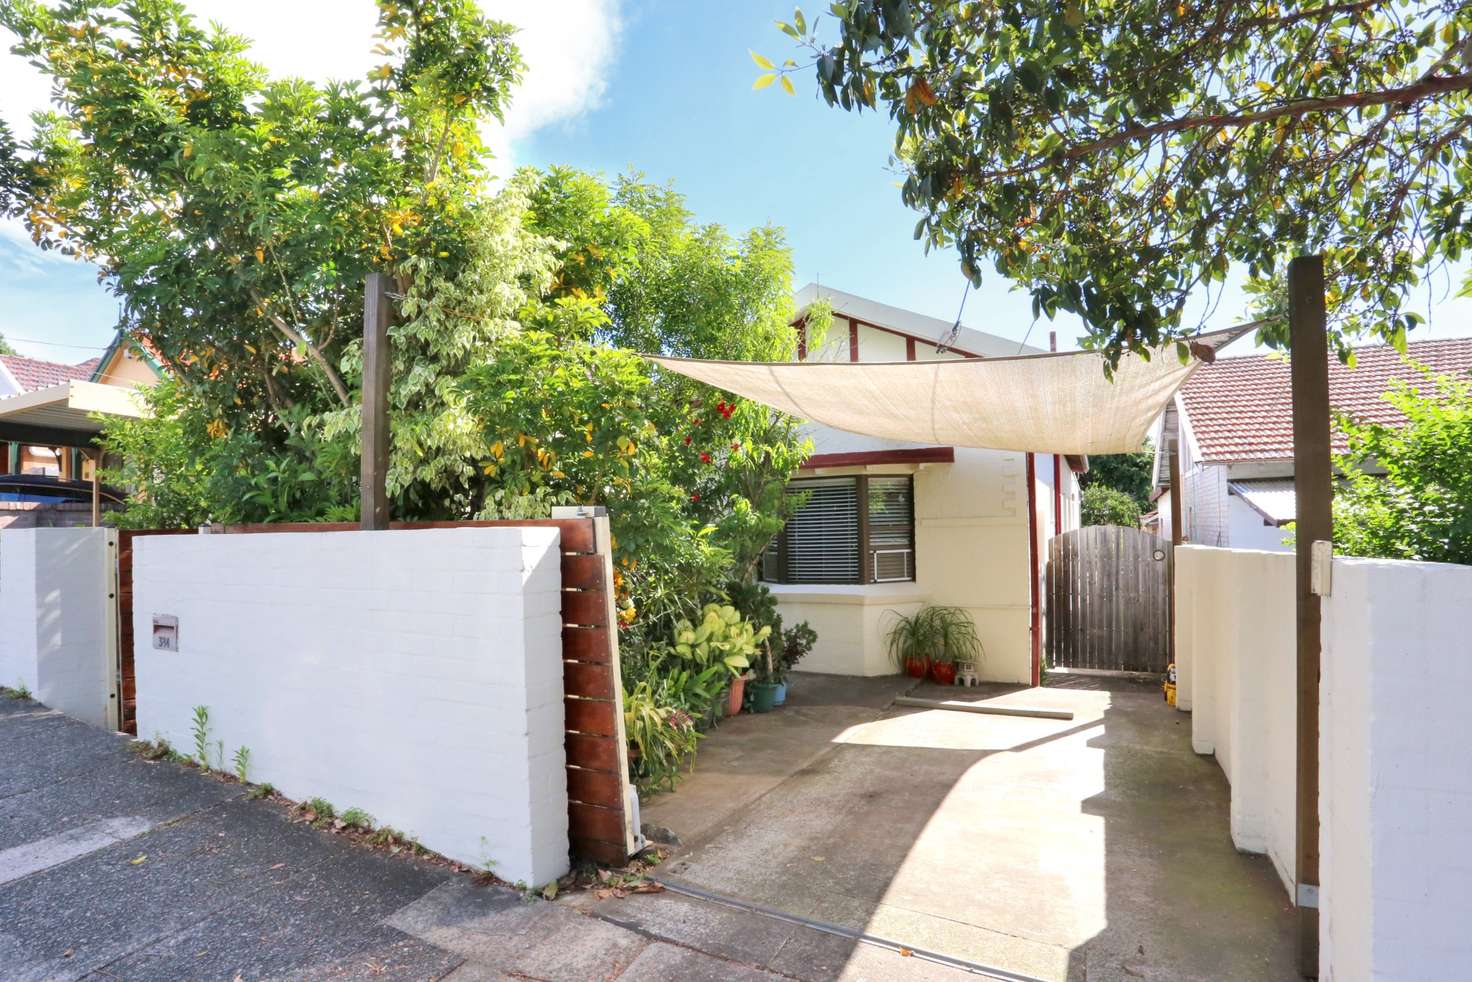 Main view of Homely house listing, 384 Penshurst St, Chatswood NSW 2067